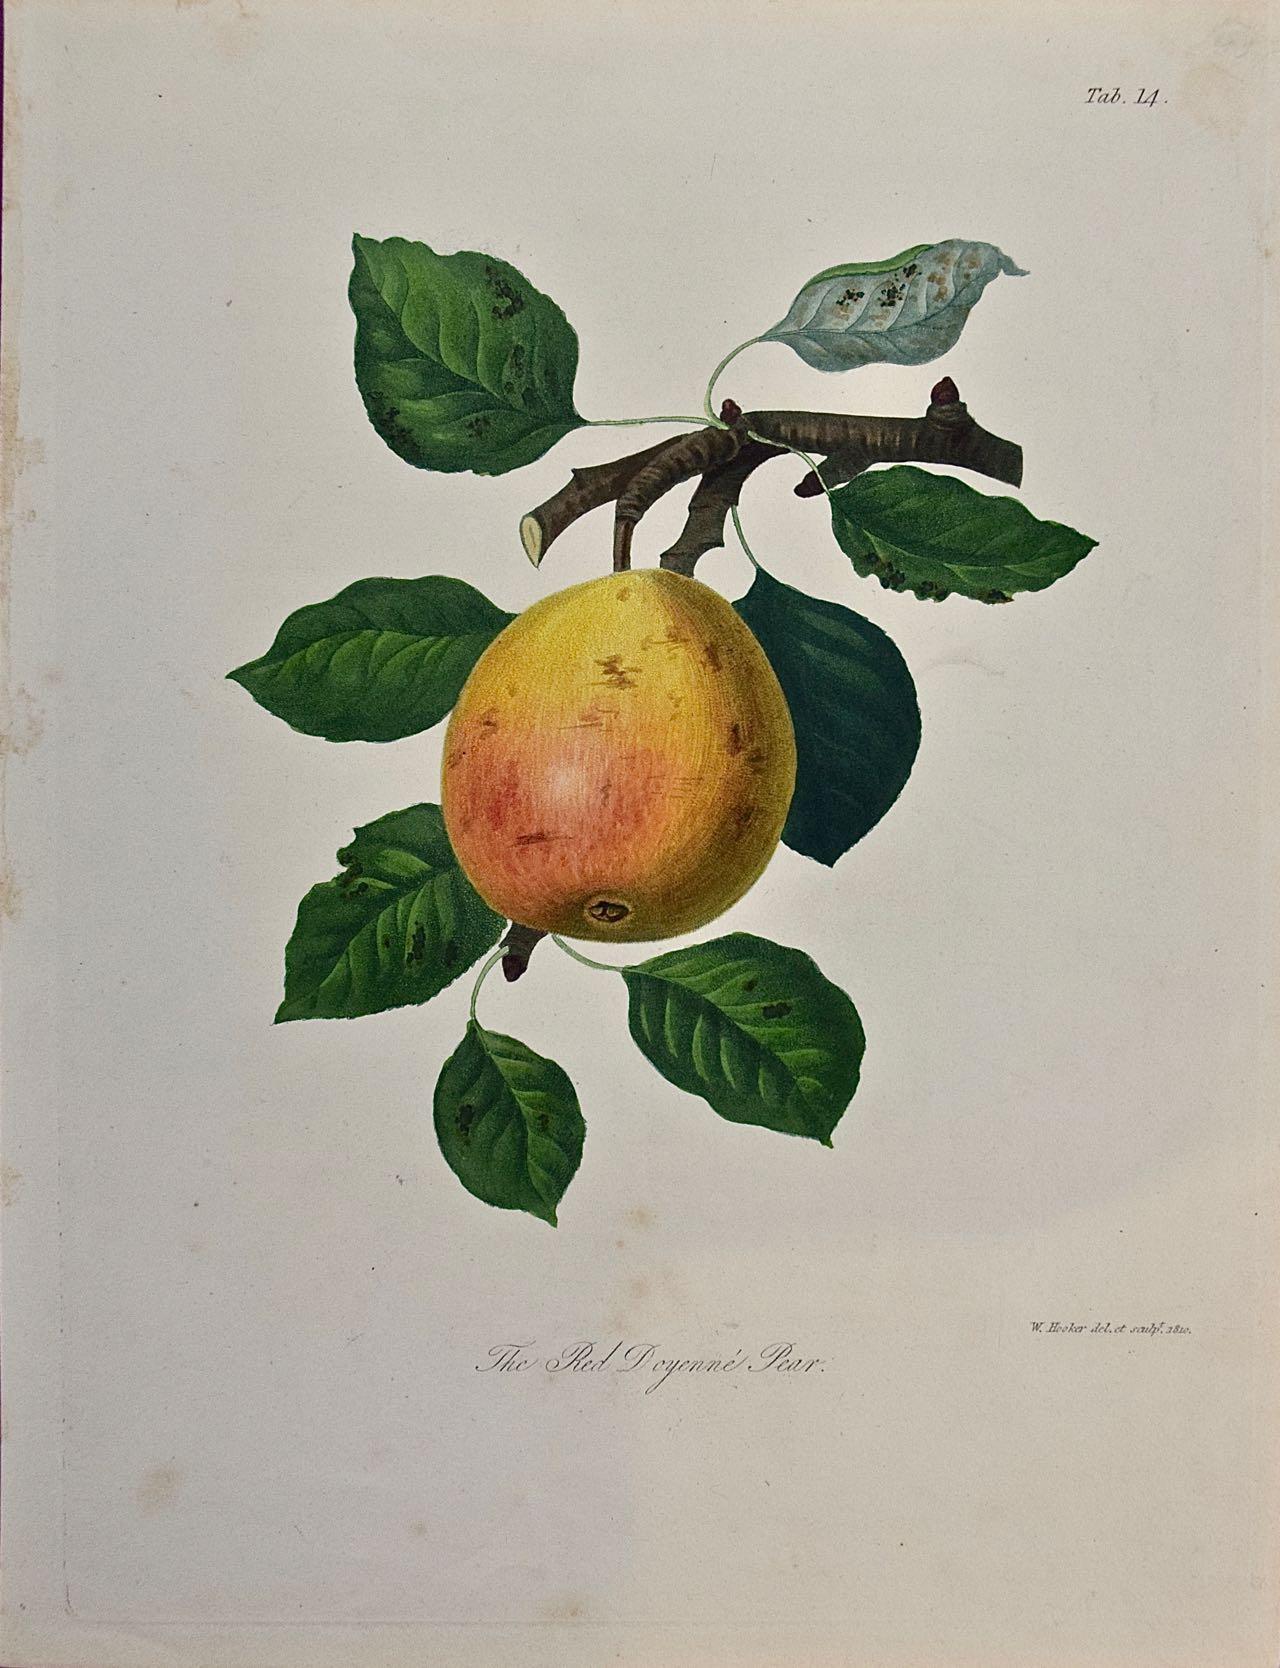 Red Doyenne Pear: Original 19th C. Hand-colored Engraving by Sir William Hooker